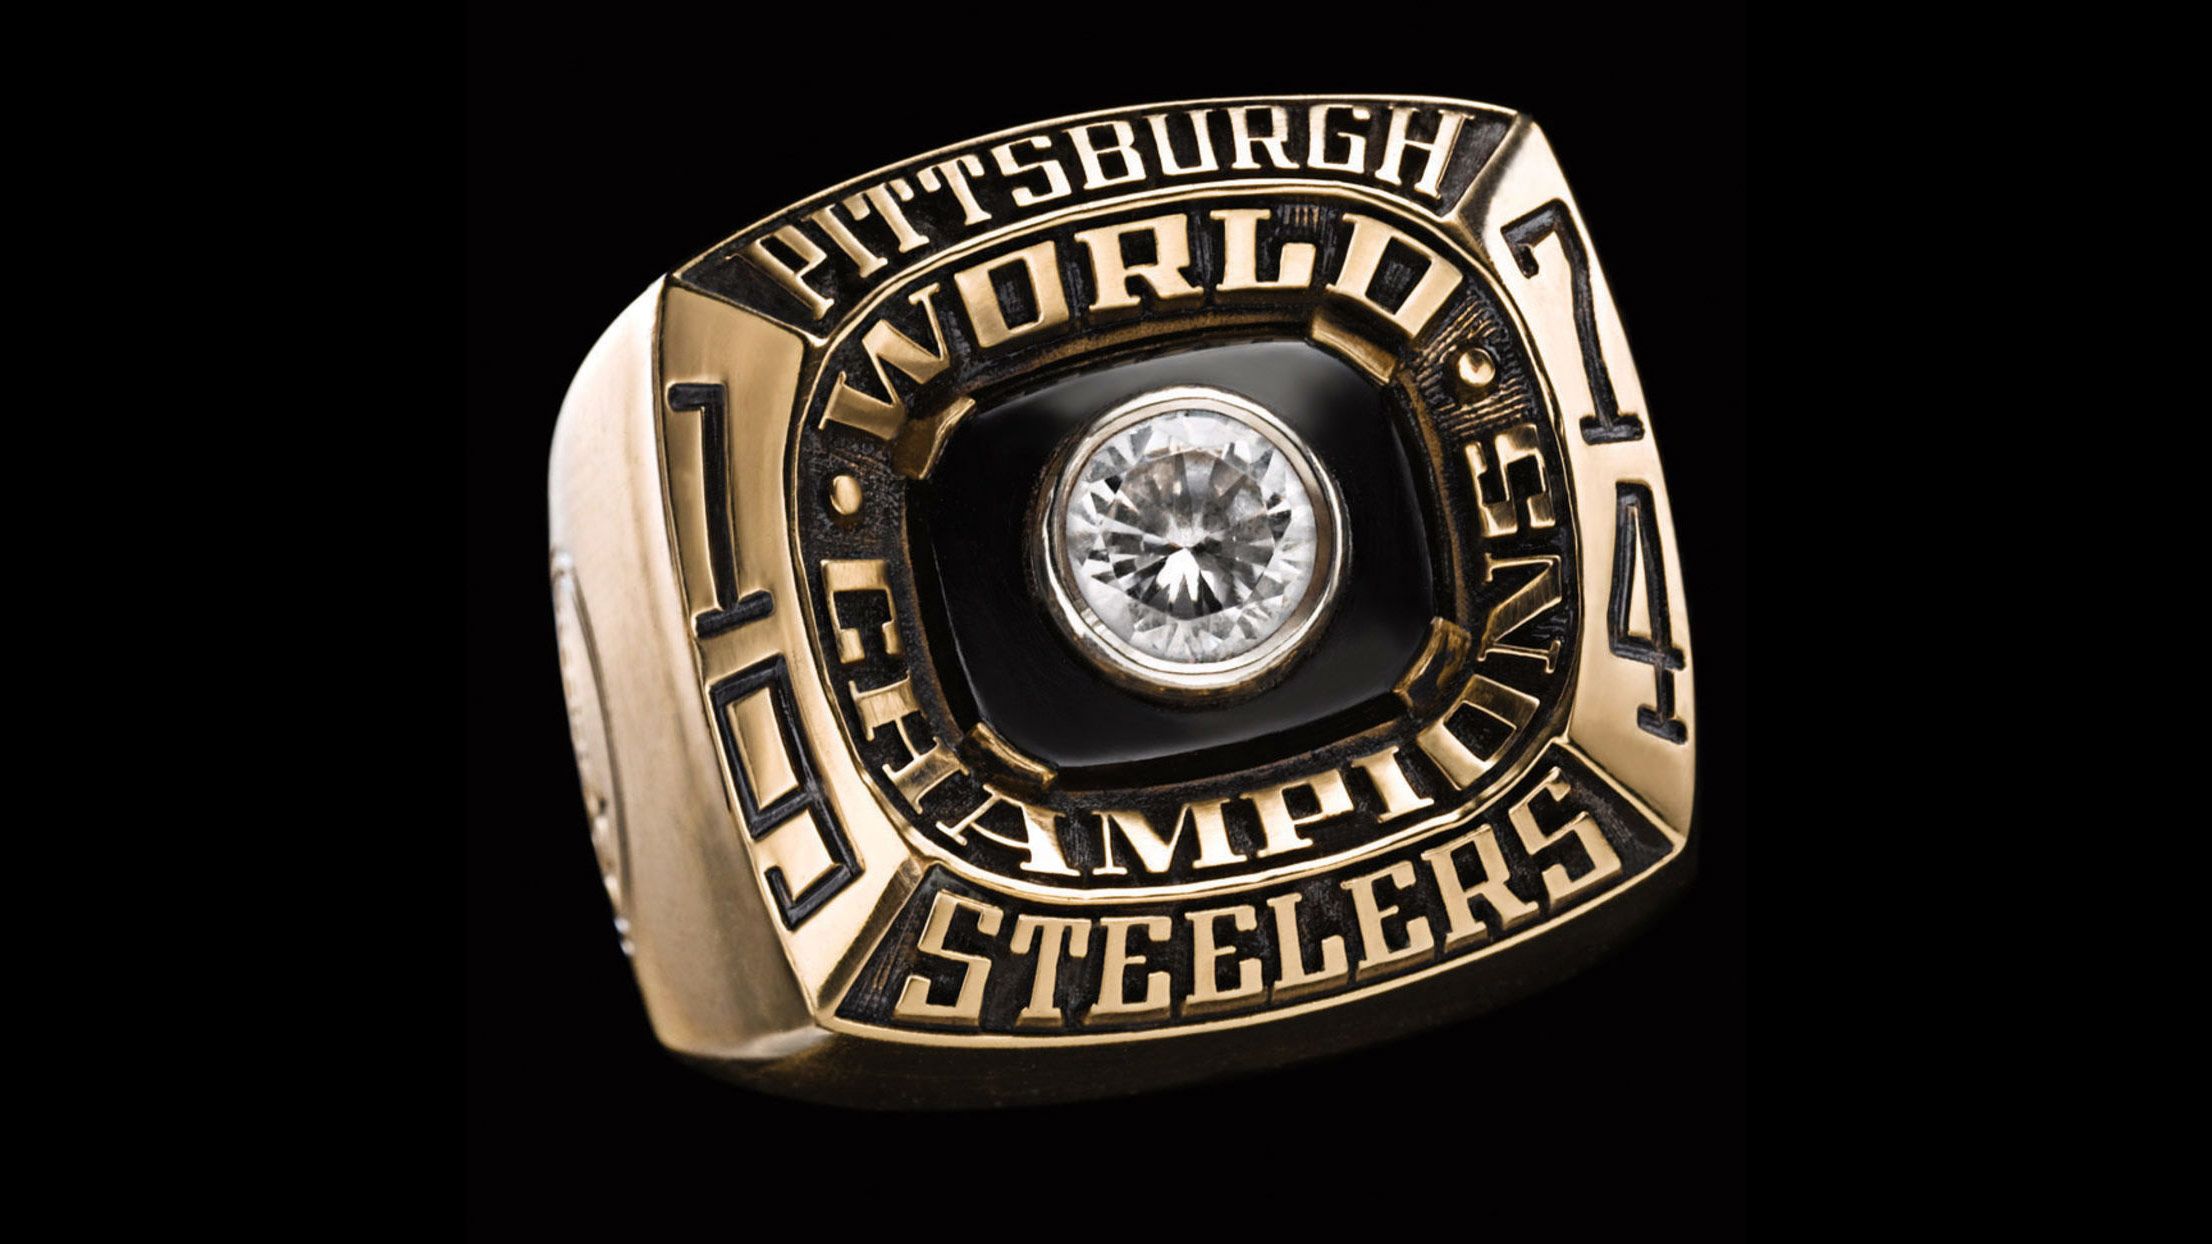 Super Bowl rings: Every ring design from football history